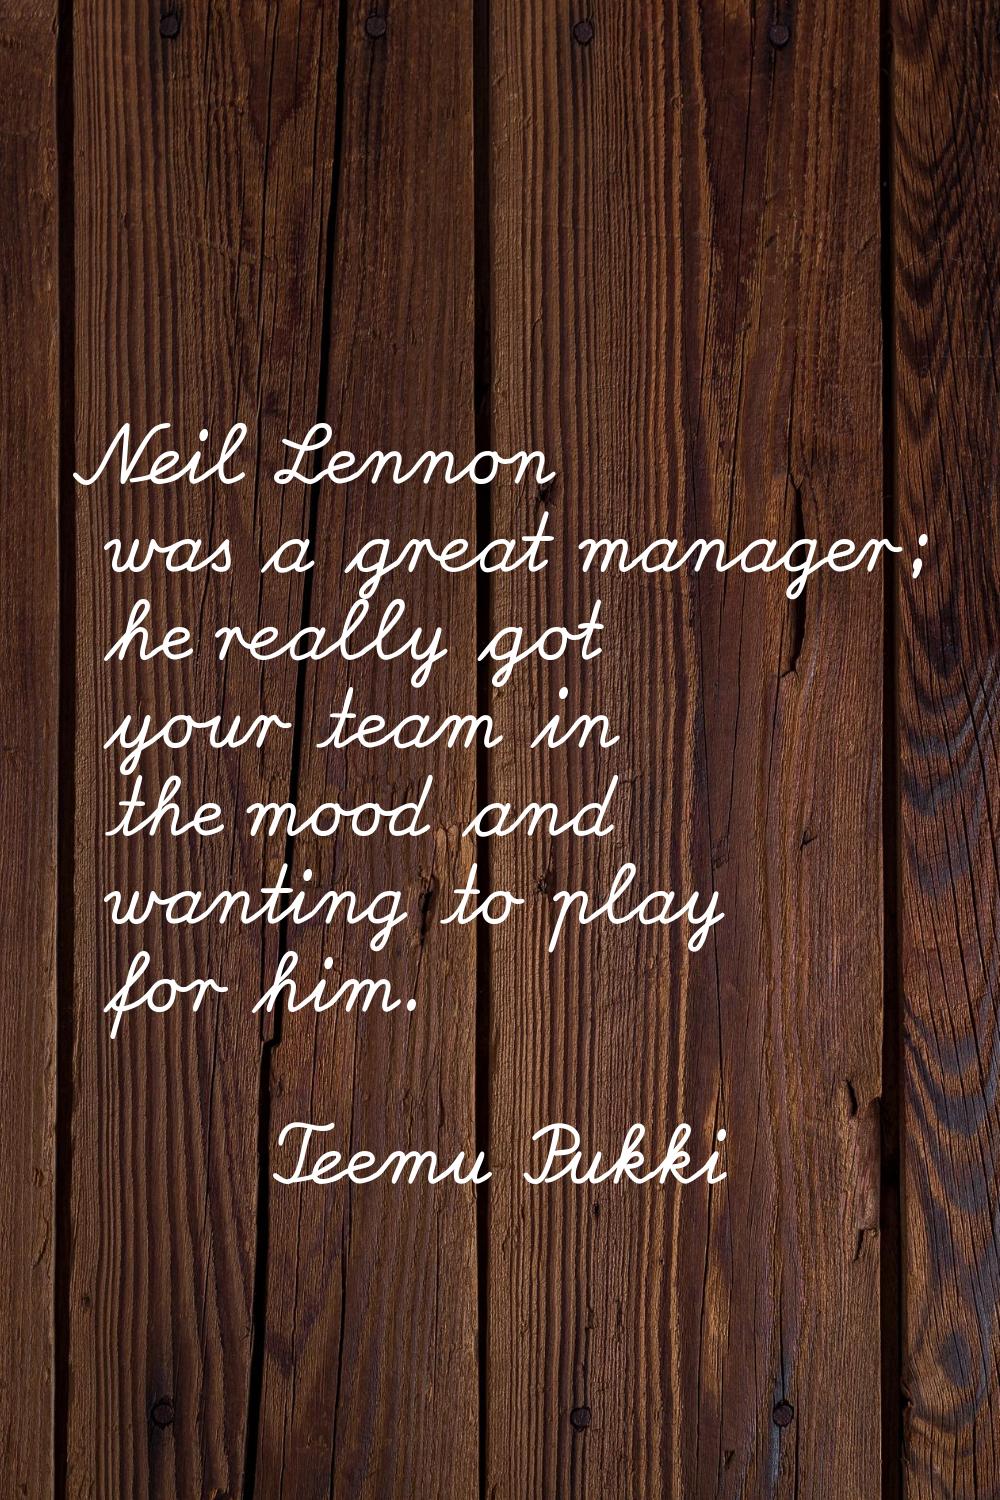 Neil Lennon was a great manager; he really got your team in the mood and wanting to play for him.